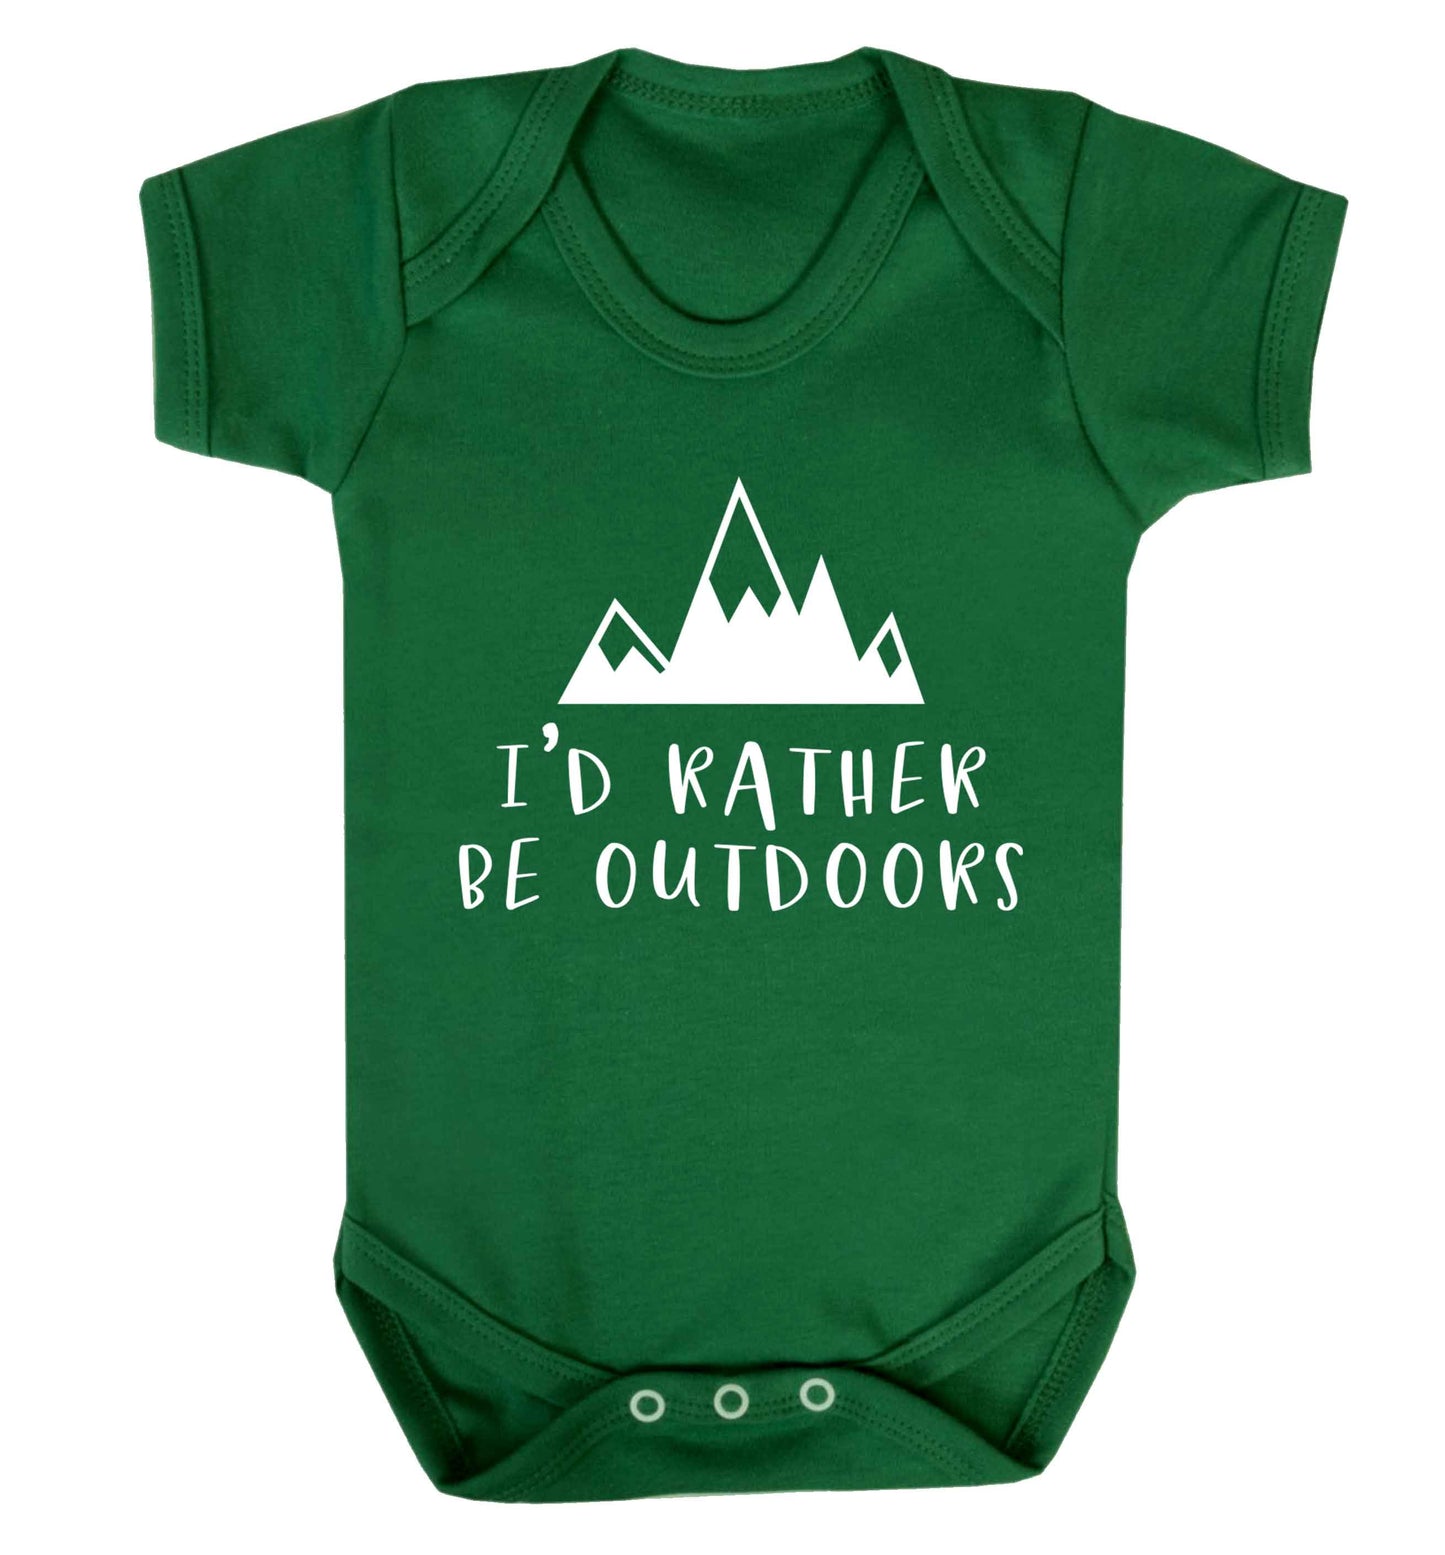 I'd rather be outdoors Baby Vest green 18-24 months